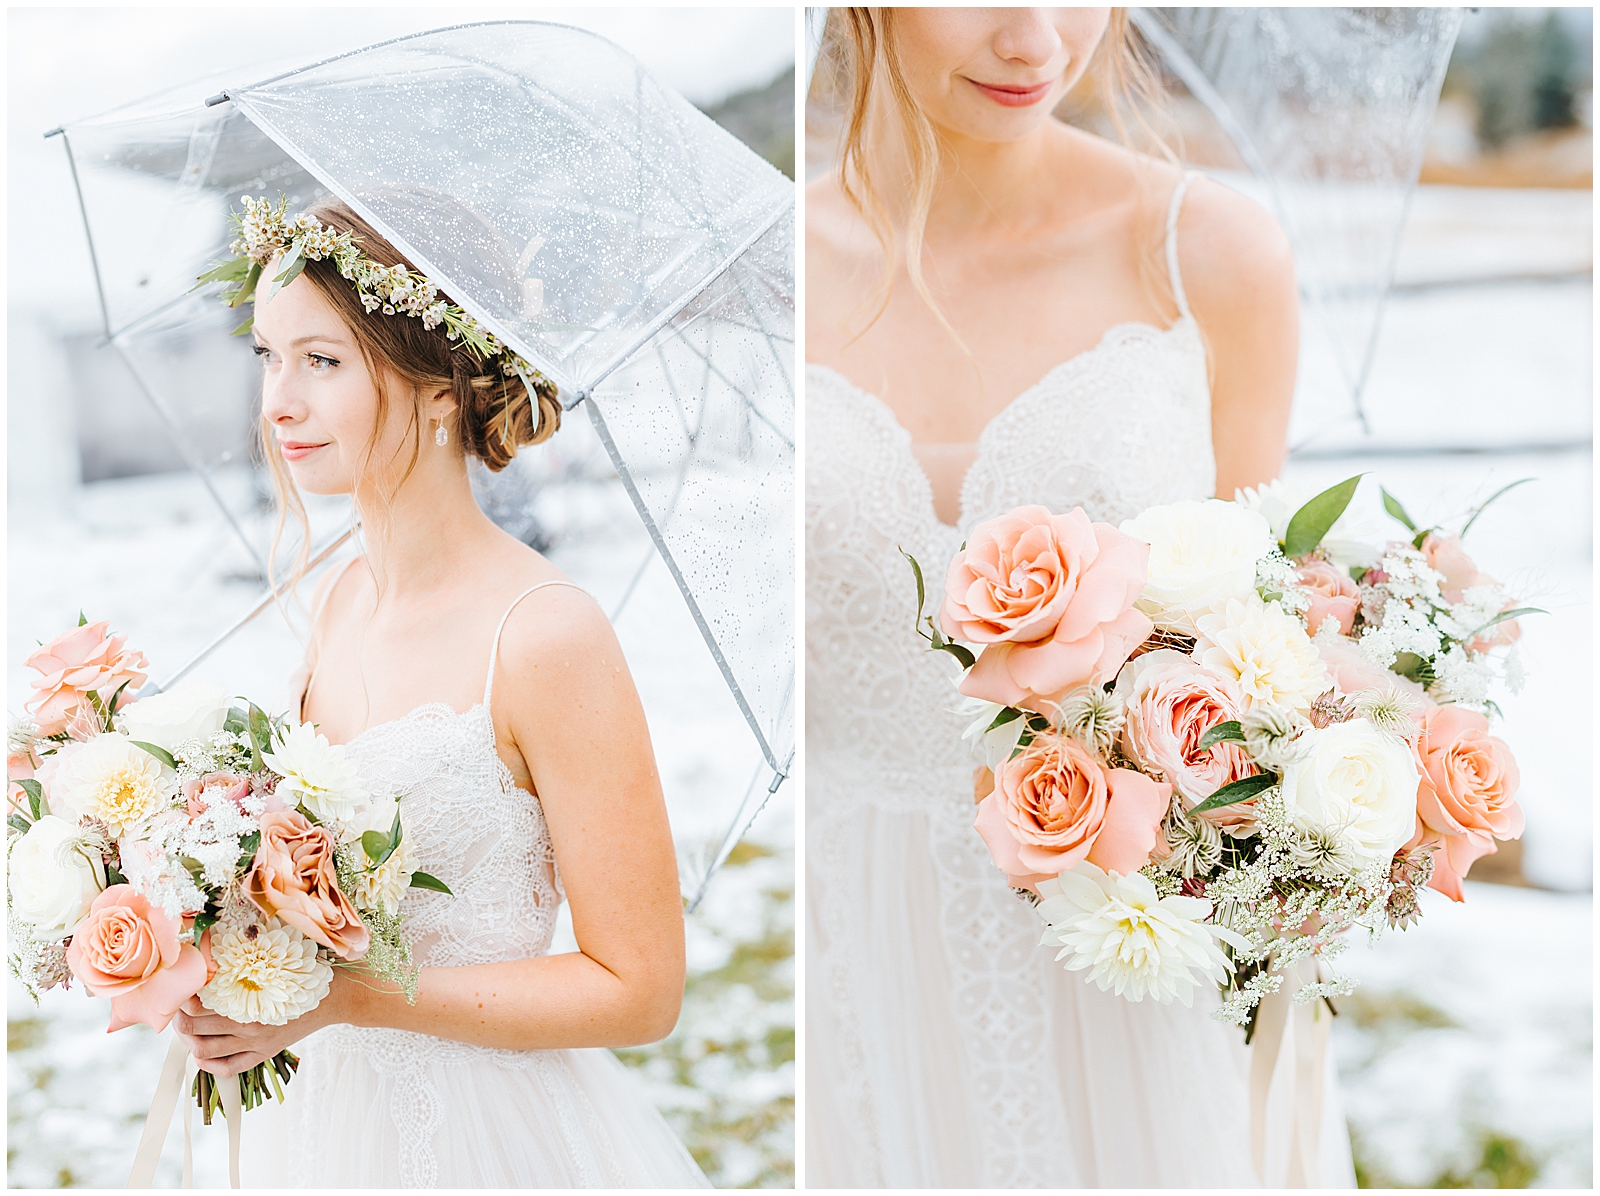 Dusty Rose Wedding Bouquet and Bride on rainy wedding day with clear umbrella